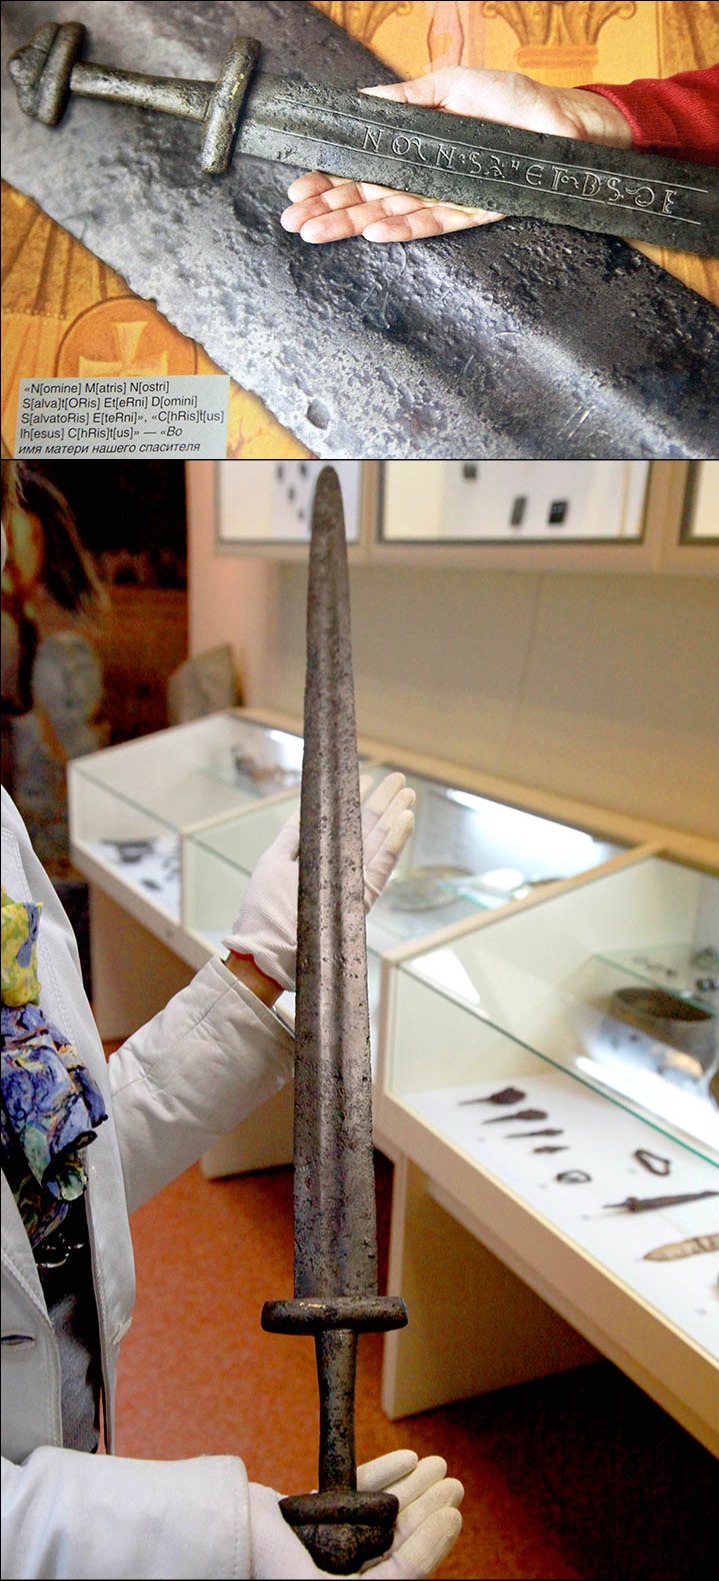 This German-made 12th century blade, adorned in Sweden, was discovered in 1975 buried under a tree in Siberia, Russia.jpg